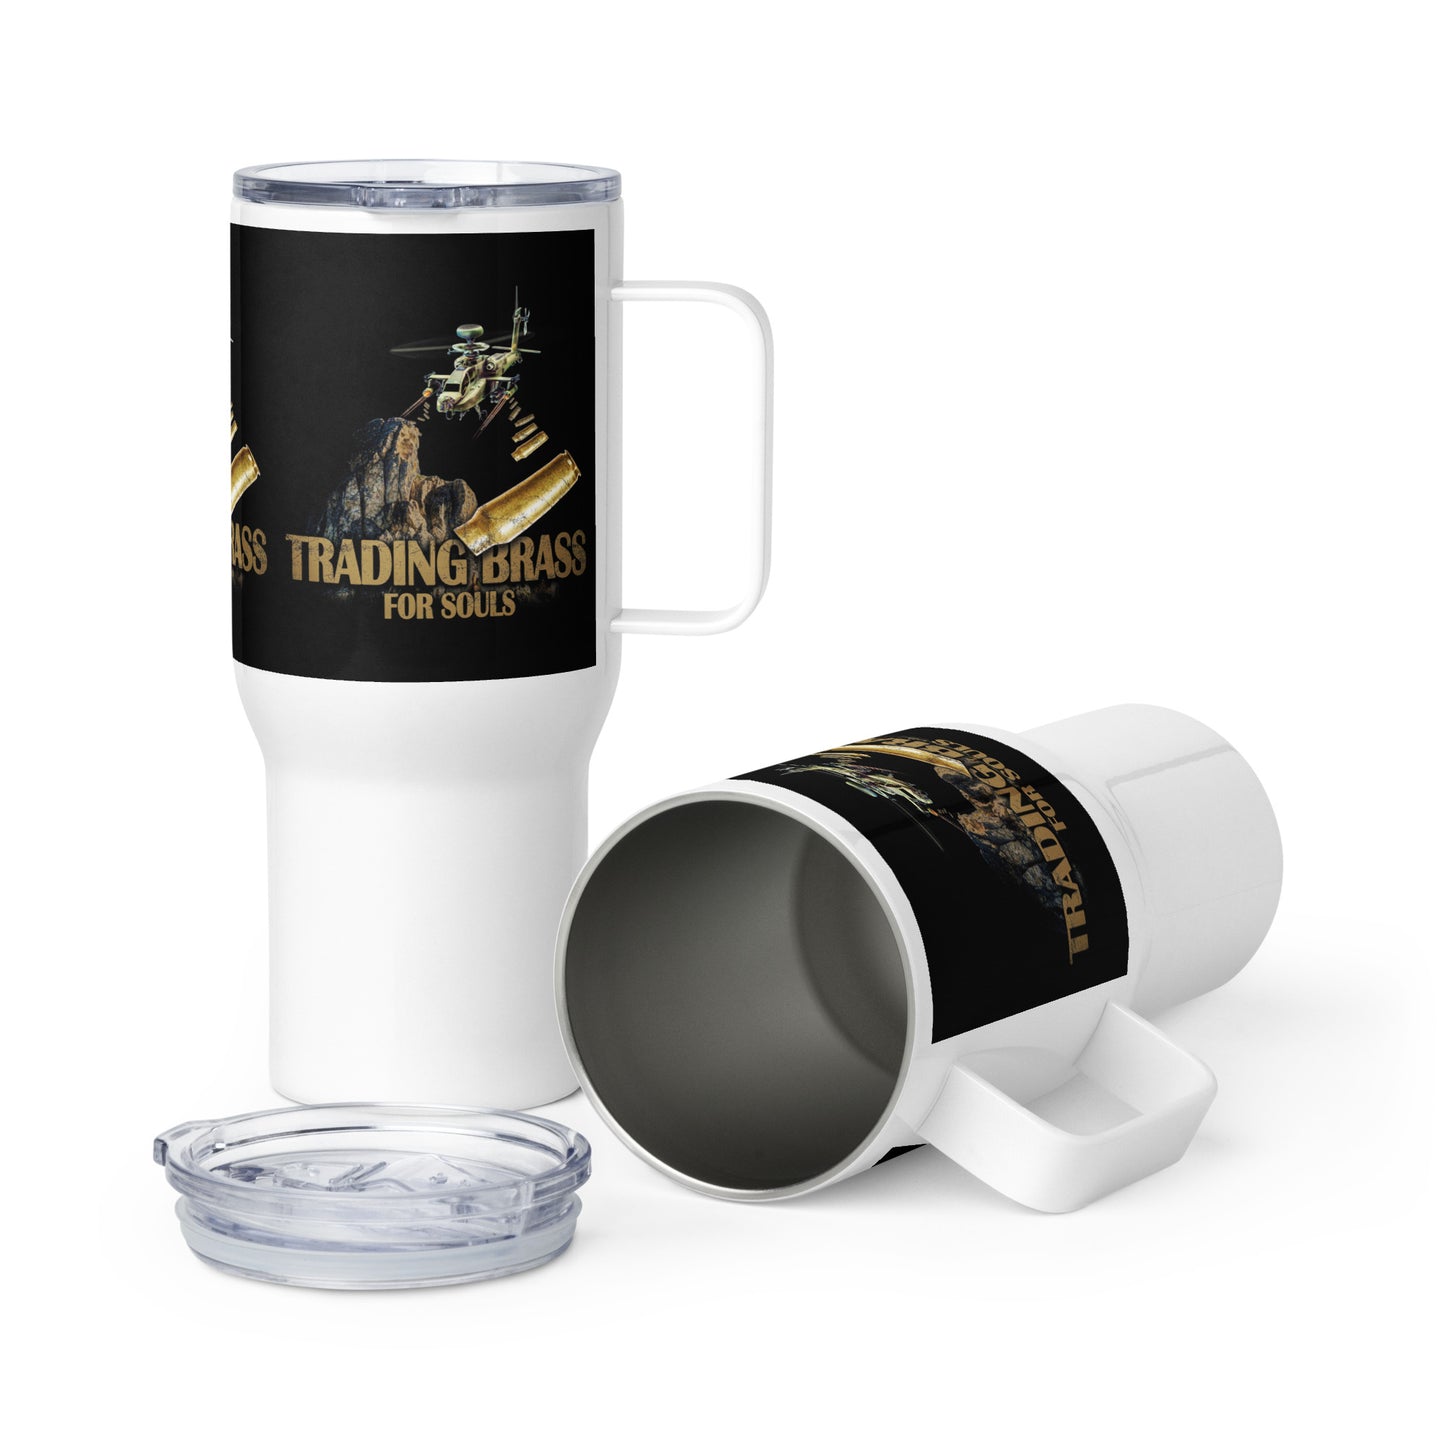 Trading Brass For Souls Travel mug with a handle